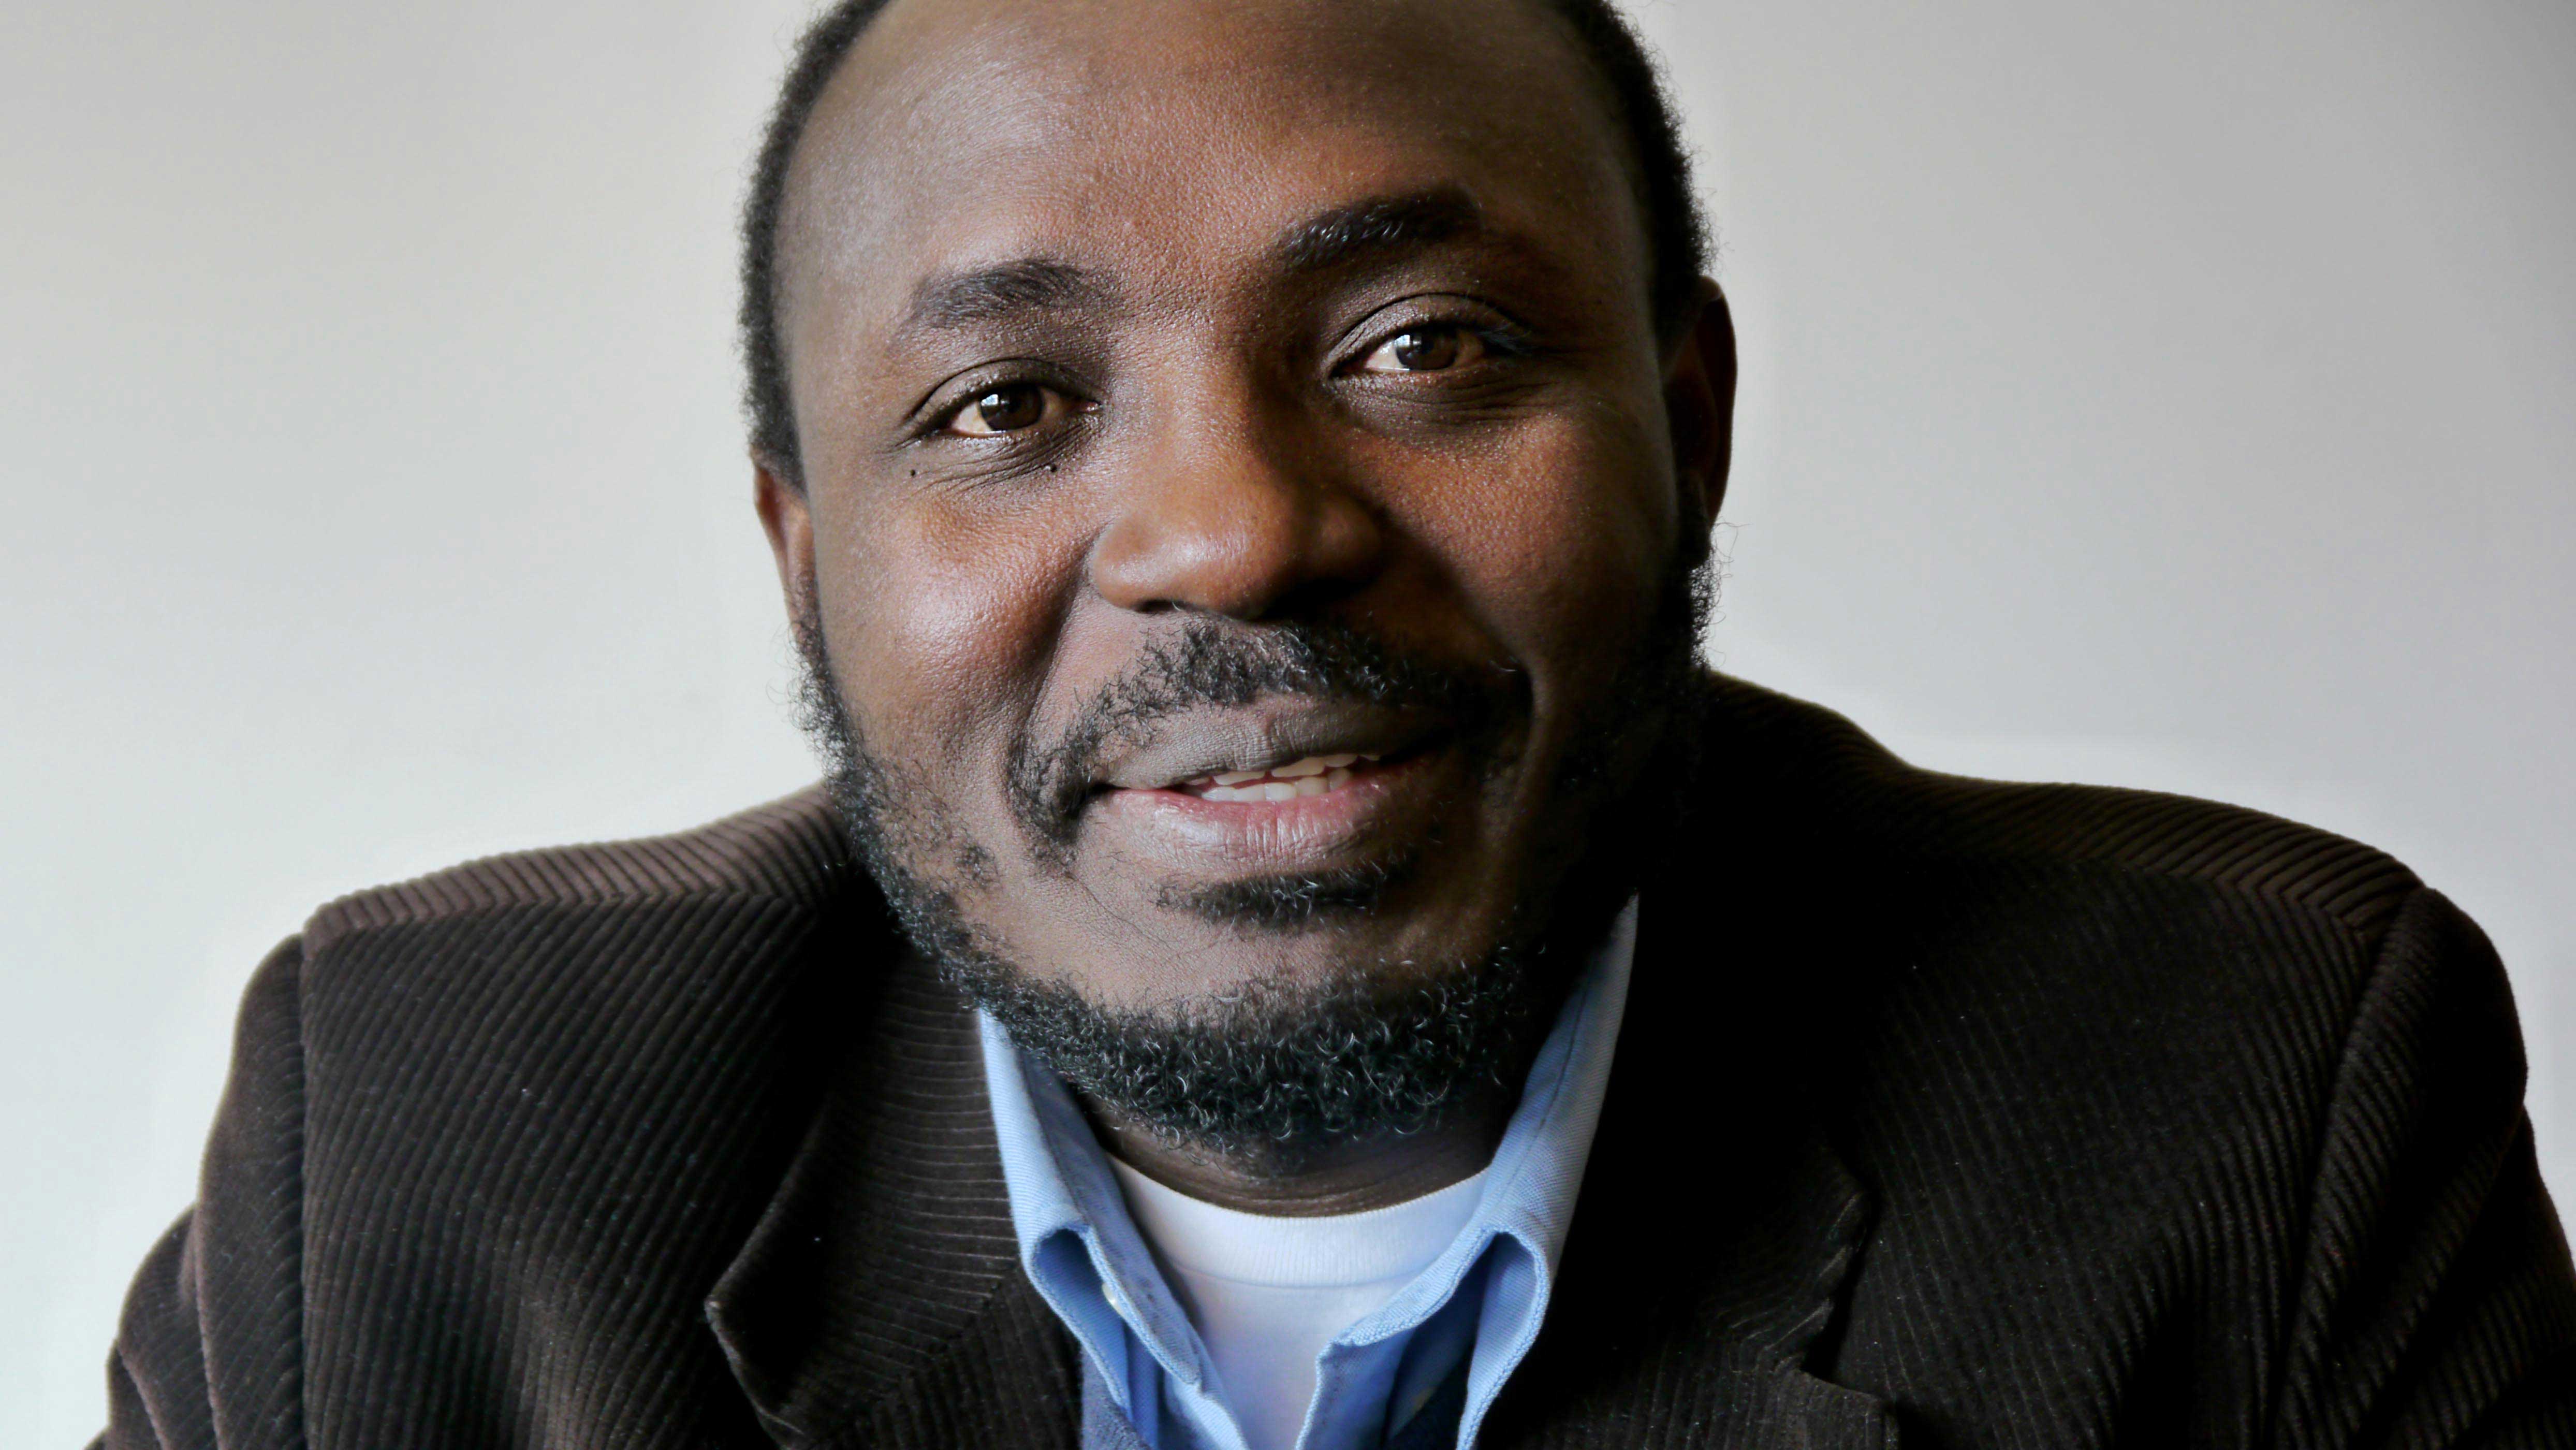 Rafael Marques de Morais has exposed a range of high-level corruption cases and investigated human rights violations in Angola's diamond areas., Rafael Marques de Morais/Makaangola.org